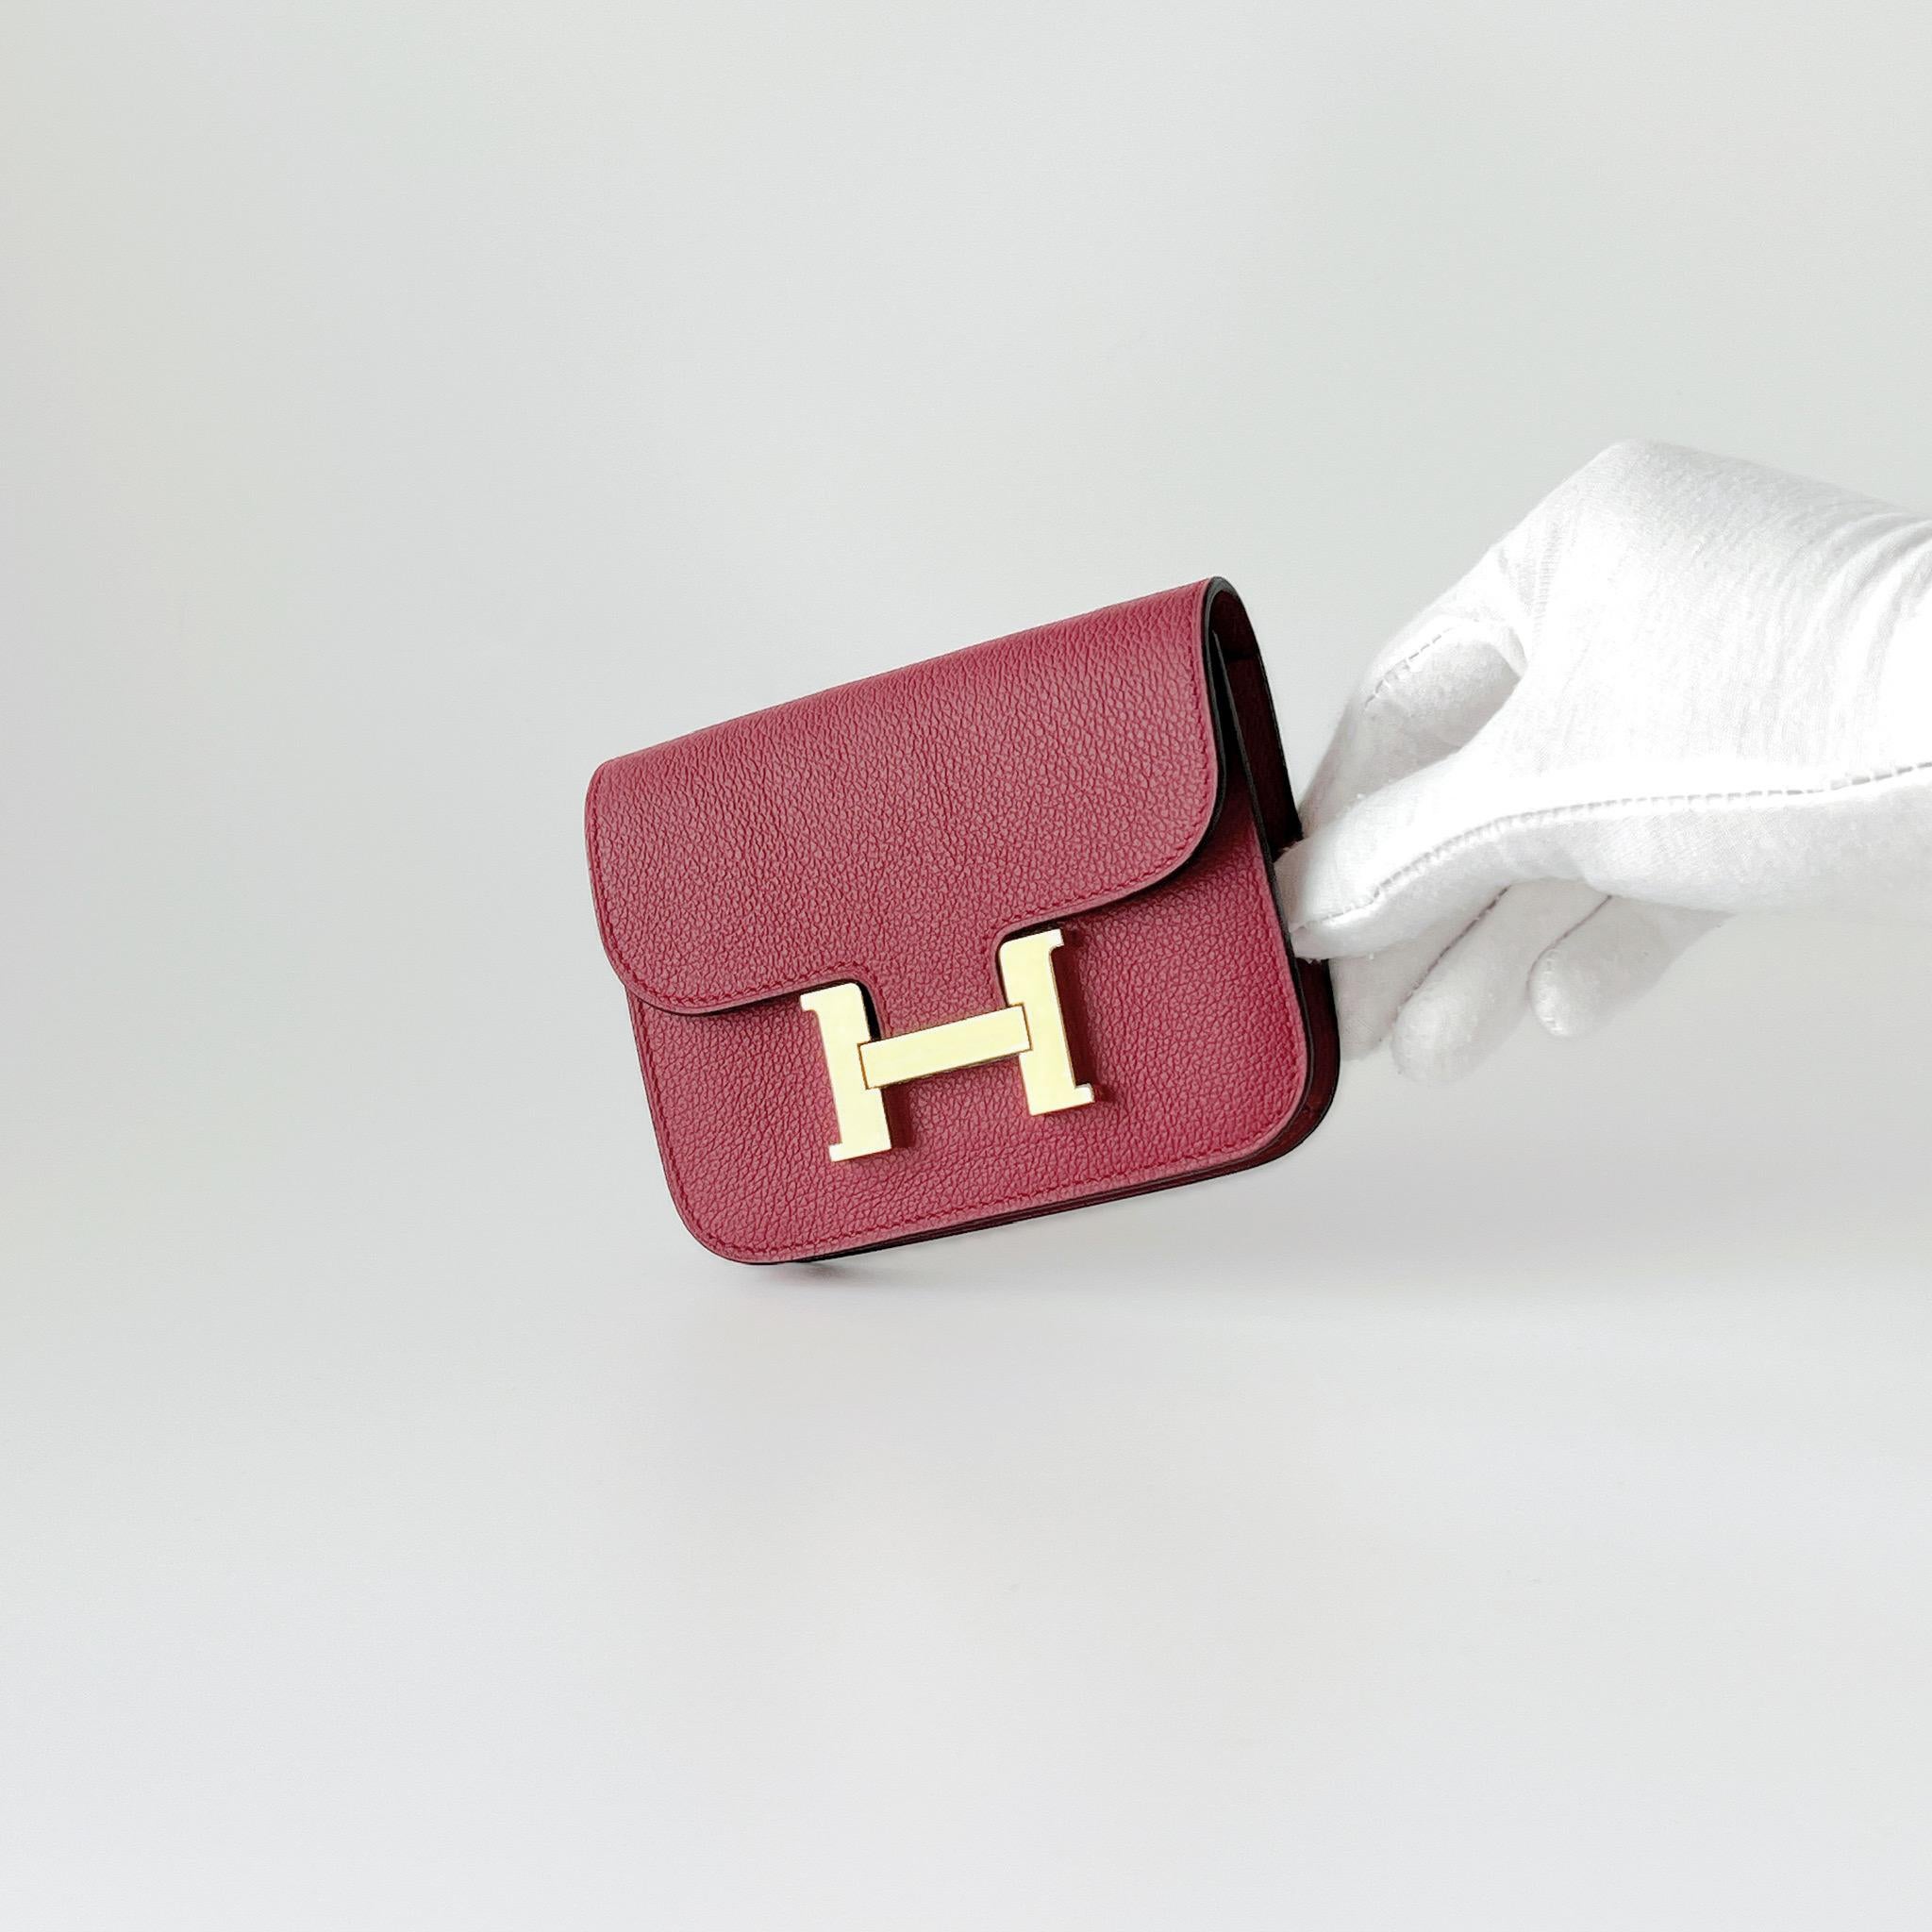 Hermes Constance Slim Wallet In Rouge Grenat With Gold Hardware. This classic wallet comes in a dark red lipstick coloured red known as Rouge Grenat, which is complimented by Gold Hardware. The Constance Slim Wallet is typically a belt bag which can